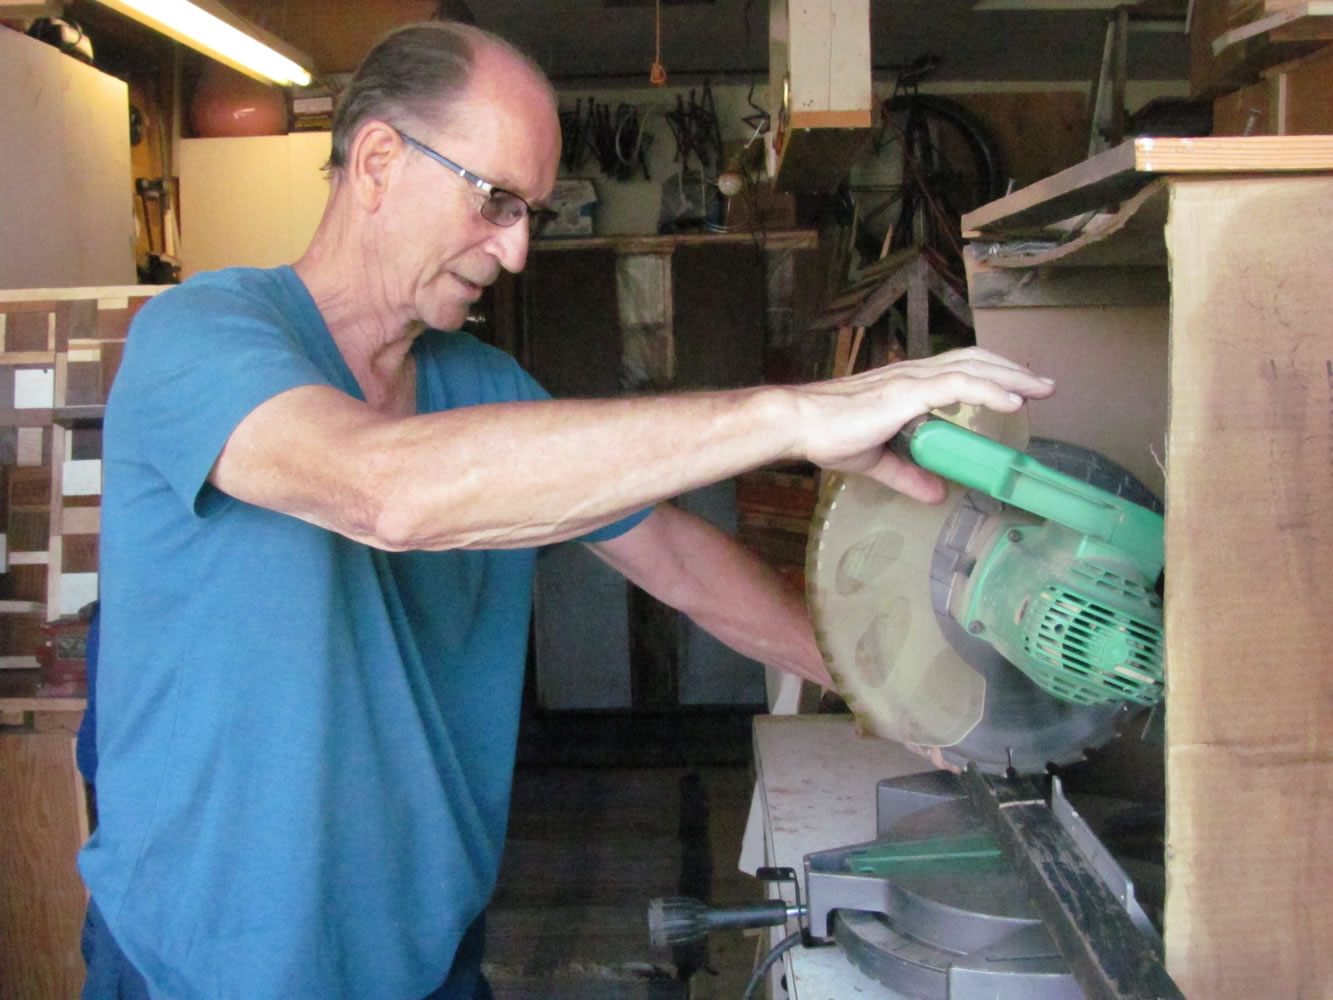 Vern Schanilec, of Washougal, has enjoyed his woodworking hobby for five years.